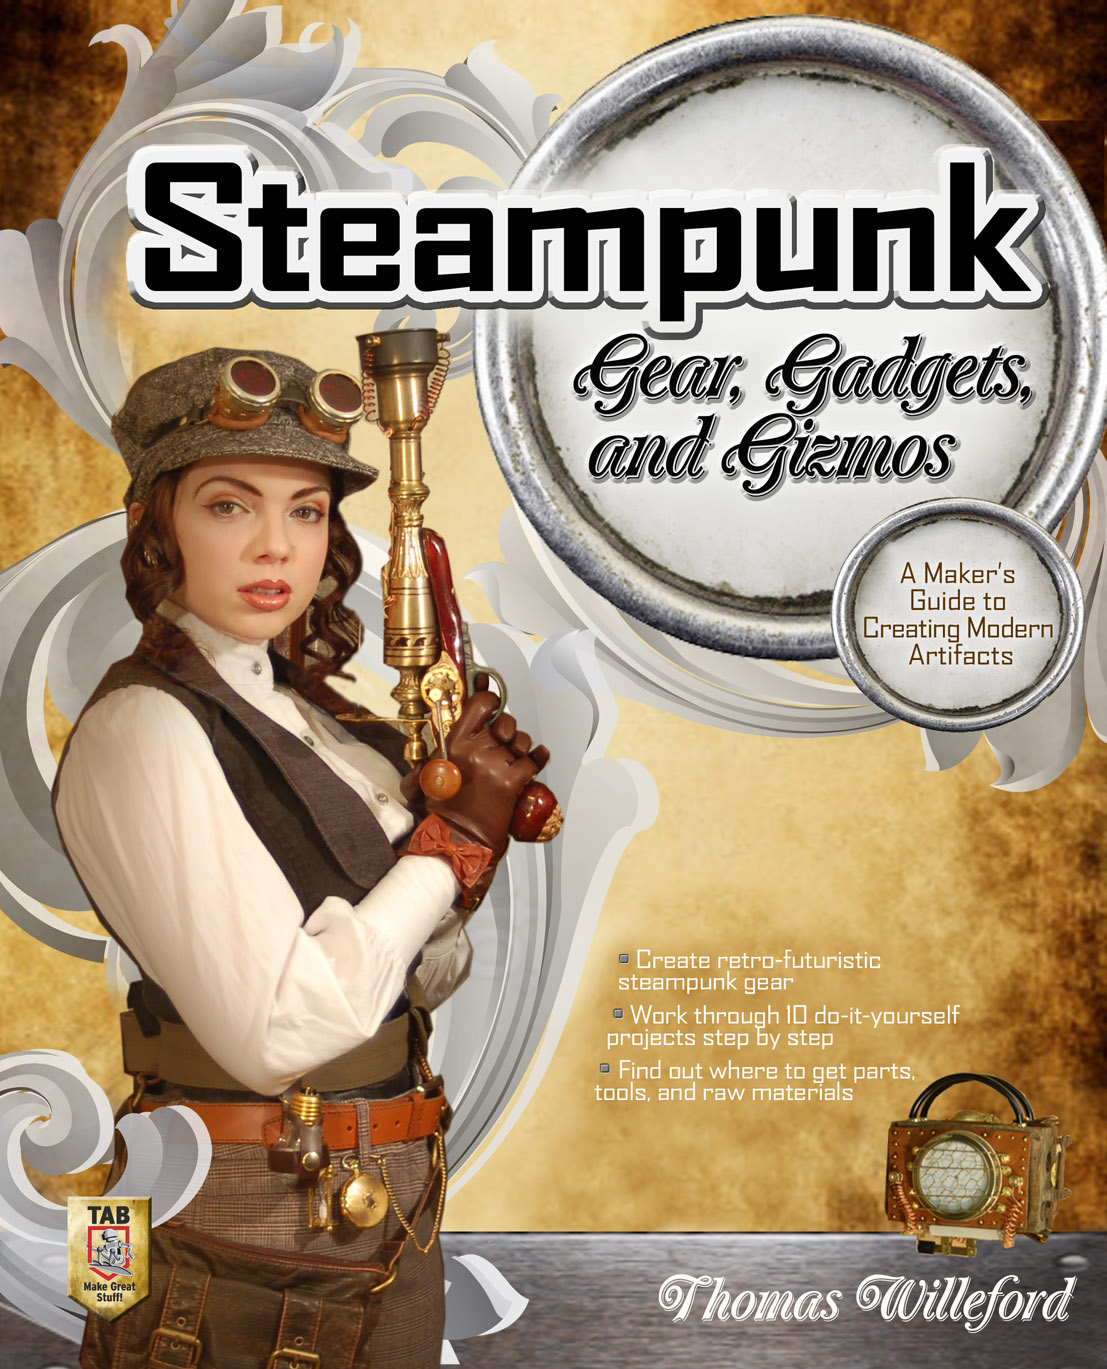 Steampunk Gear, Gadgets, and Gizmos: A Maker's Guide to Creating Modern Artifacts (McGraw-Hill, 2011)